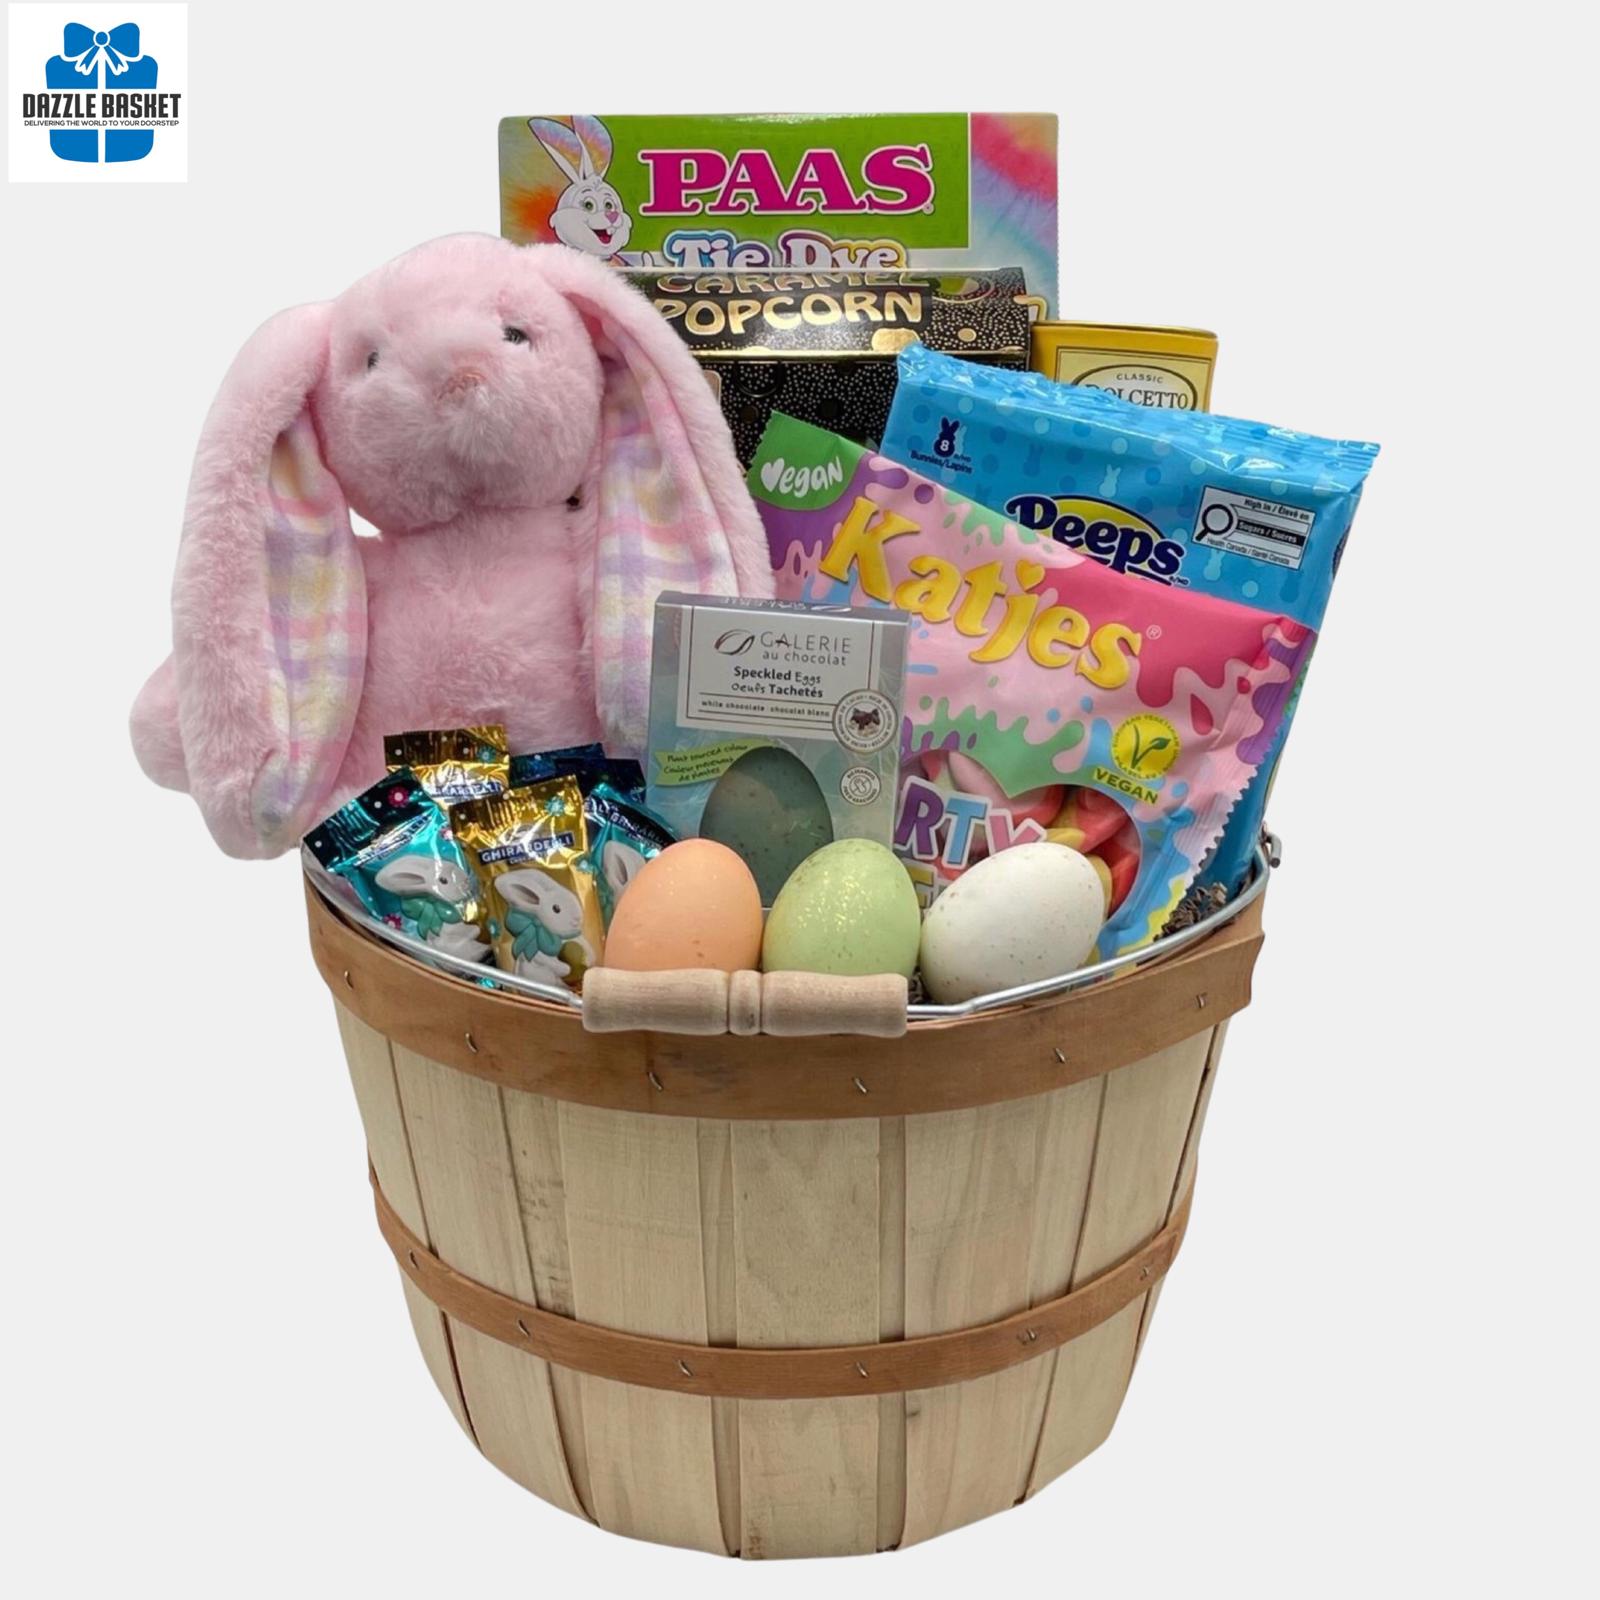 An Easter gift basket made in Calgary that includes Easter themed tasty gourmet delicacies arranged in a wooden basket with handle